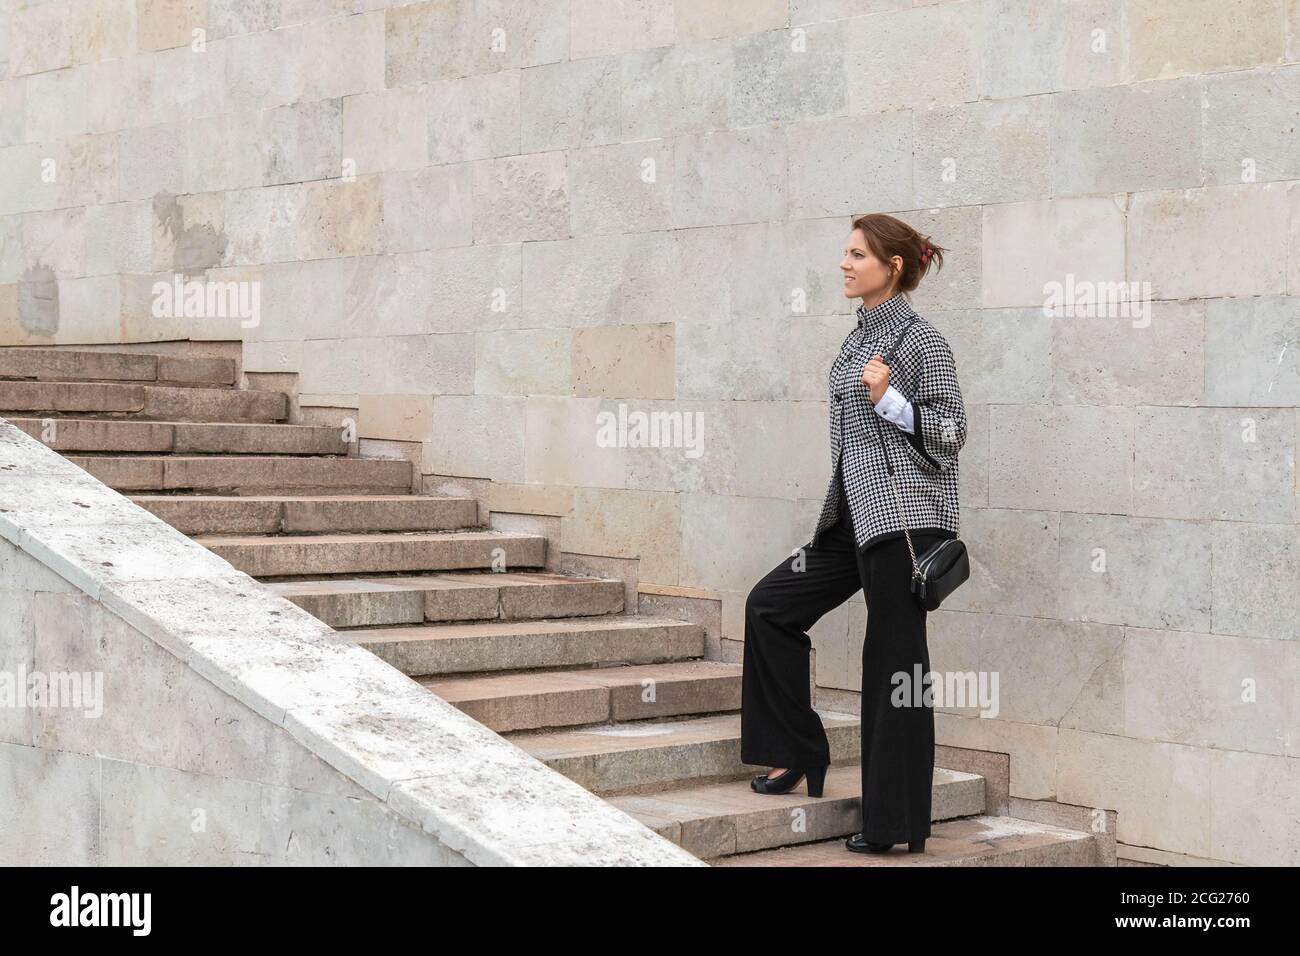 Businesswoman climbing up a concrete staircase on city wall background. Successful woman concept. Copy space Stock Photo